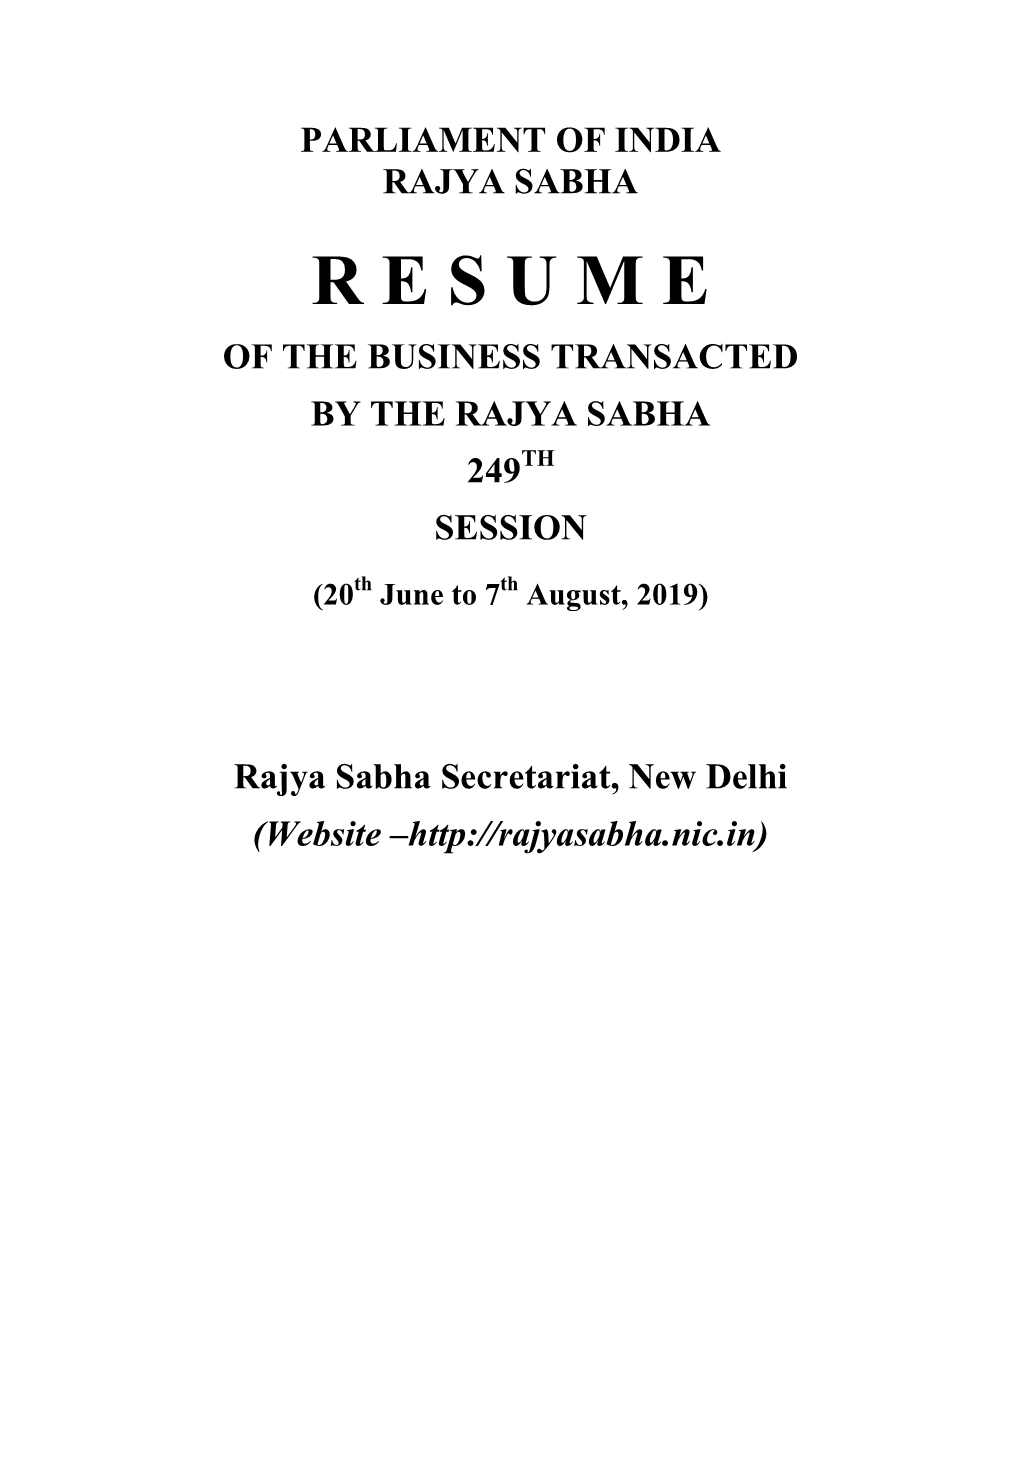 R E S U M E of the Business Transacted by the Rajya Sabha 249Th Session